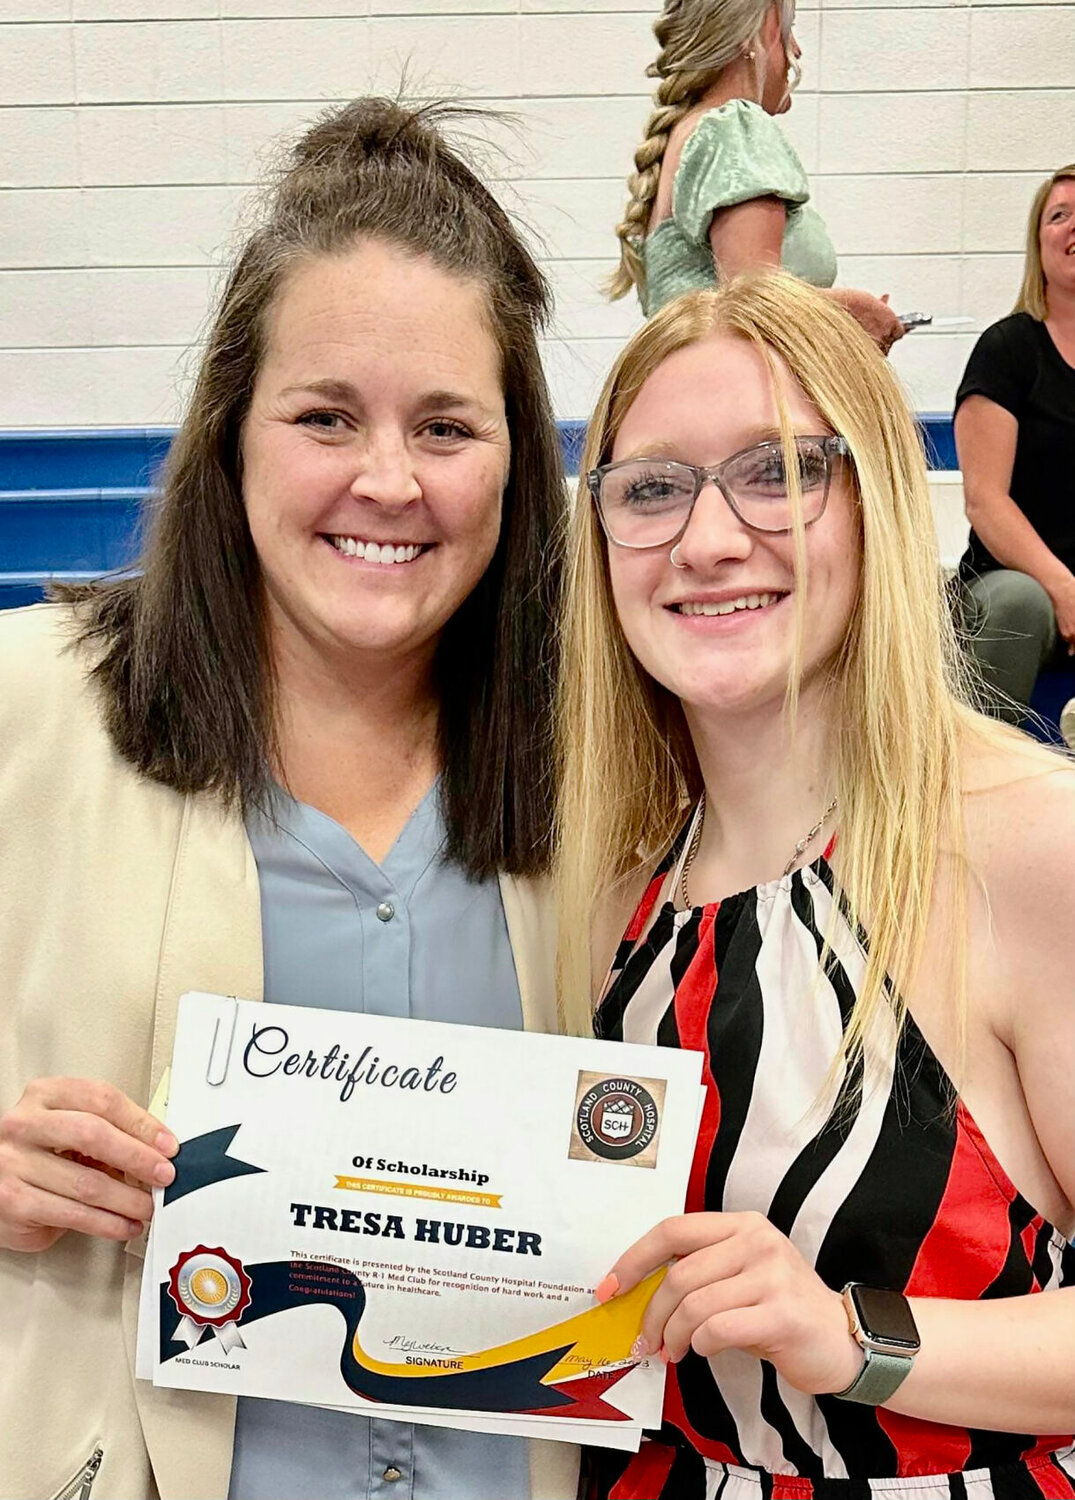 Scotland County Hospital Foundation presented a $1,000 scholarship to to Tresa Huber, a senior at SCR-1. She is planning to attend Culver-Stockton College in Canton this fall and major in Nursing.